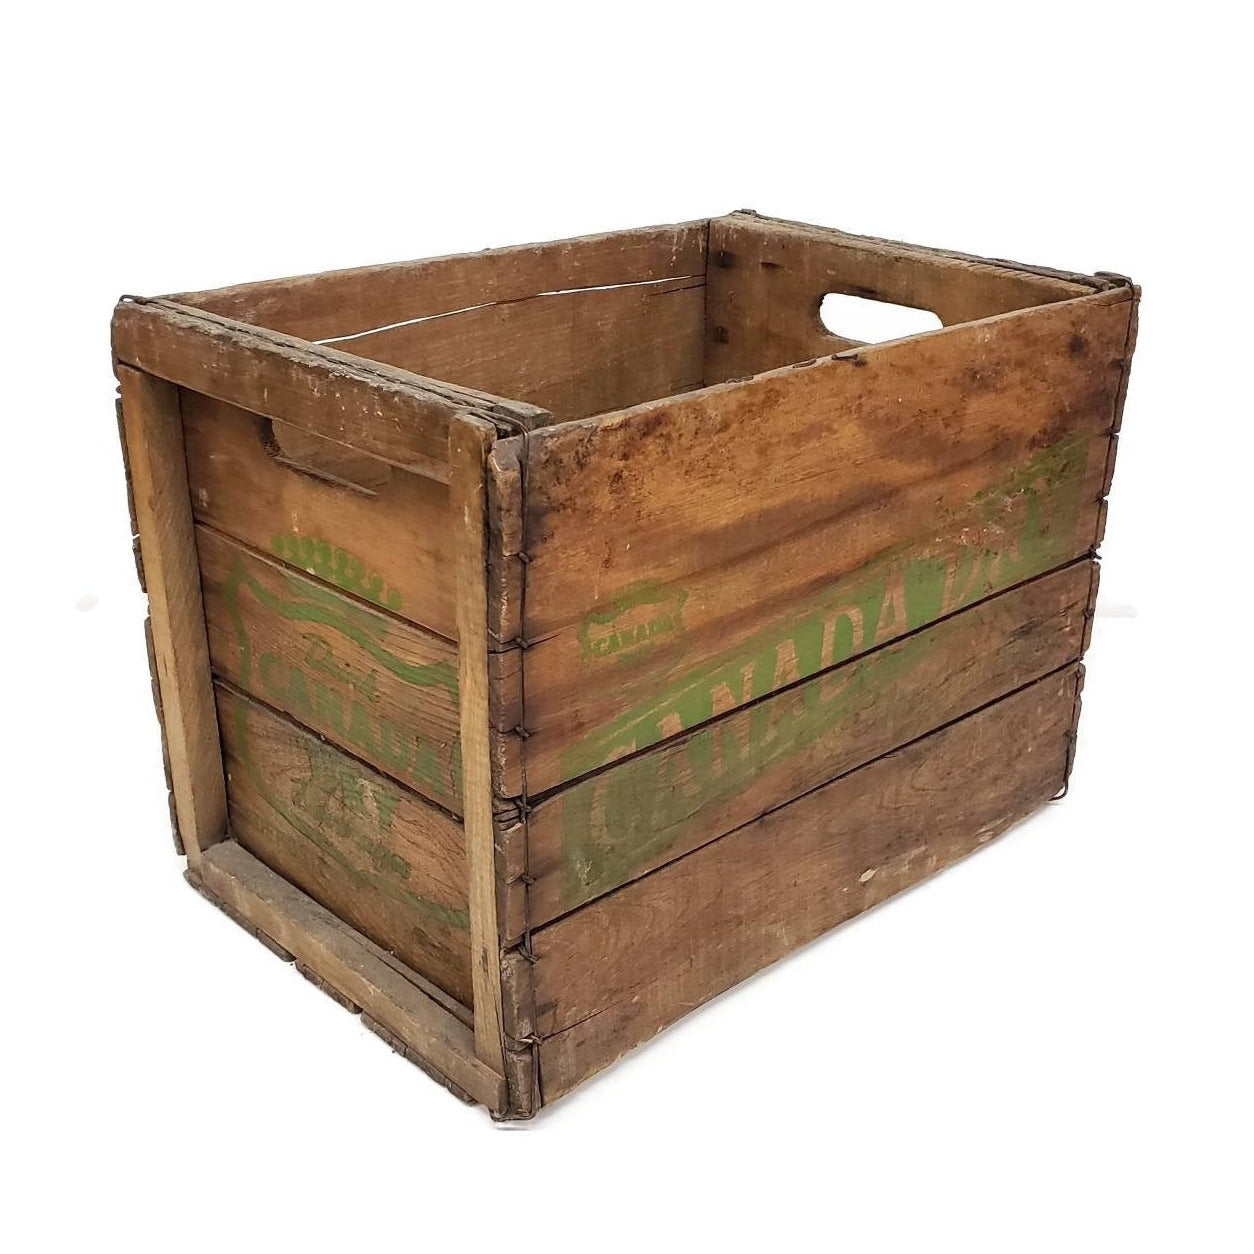 canada dry crate vinage wooden soda delivery box